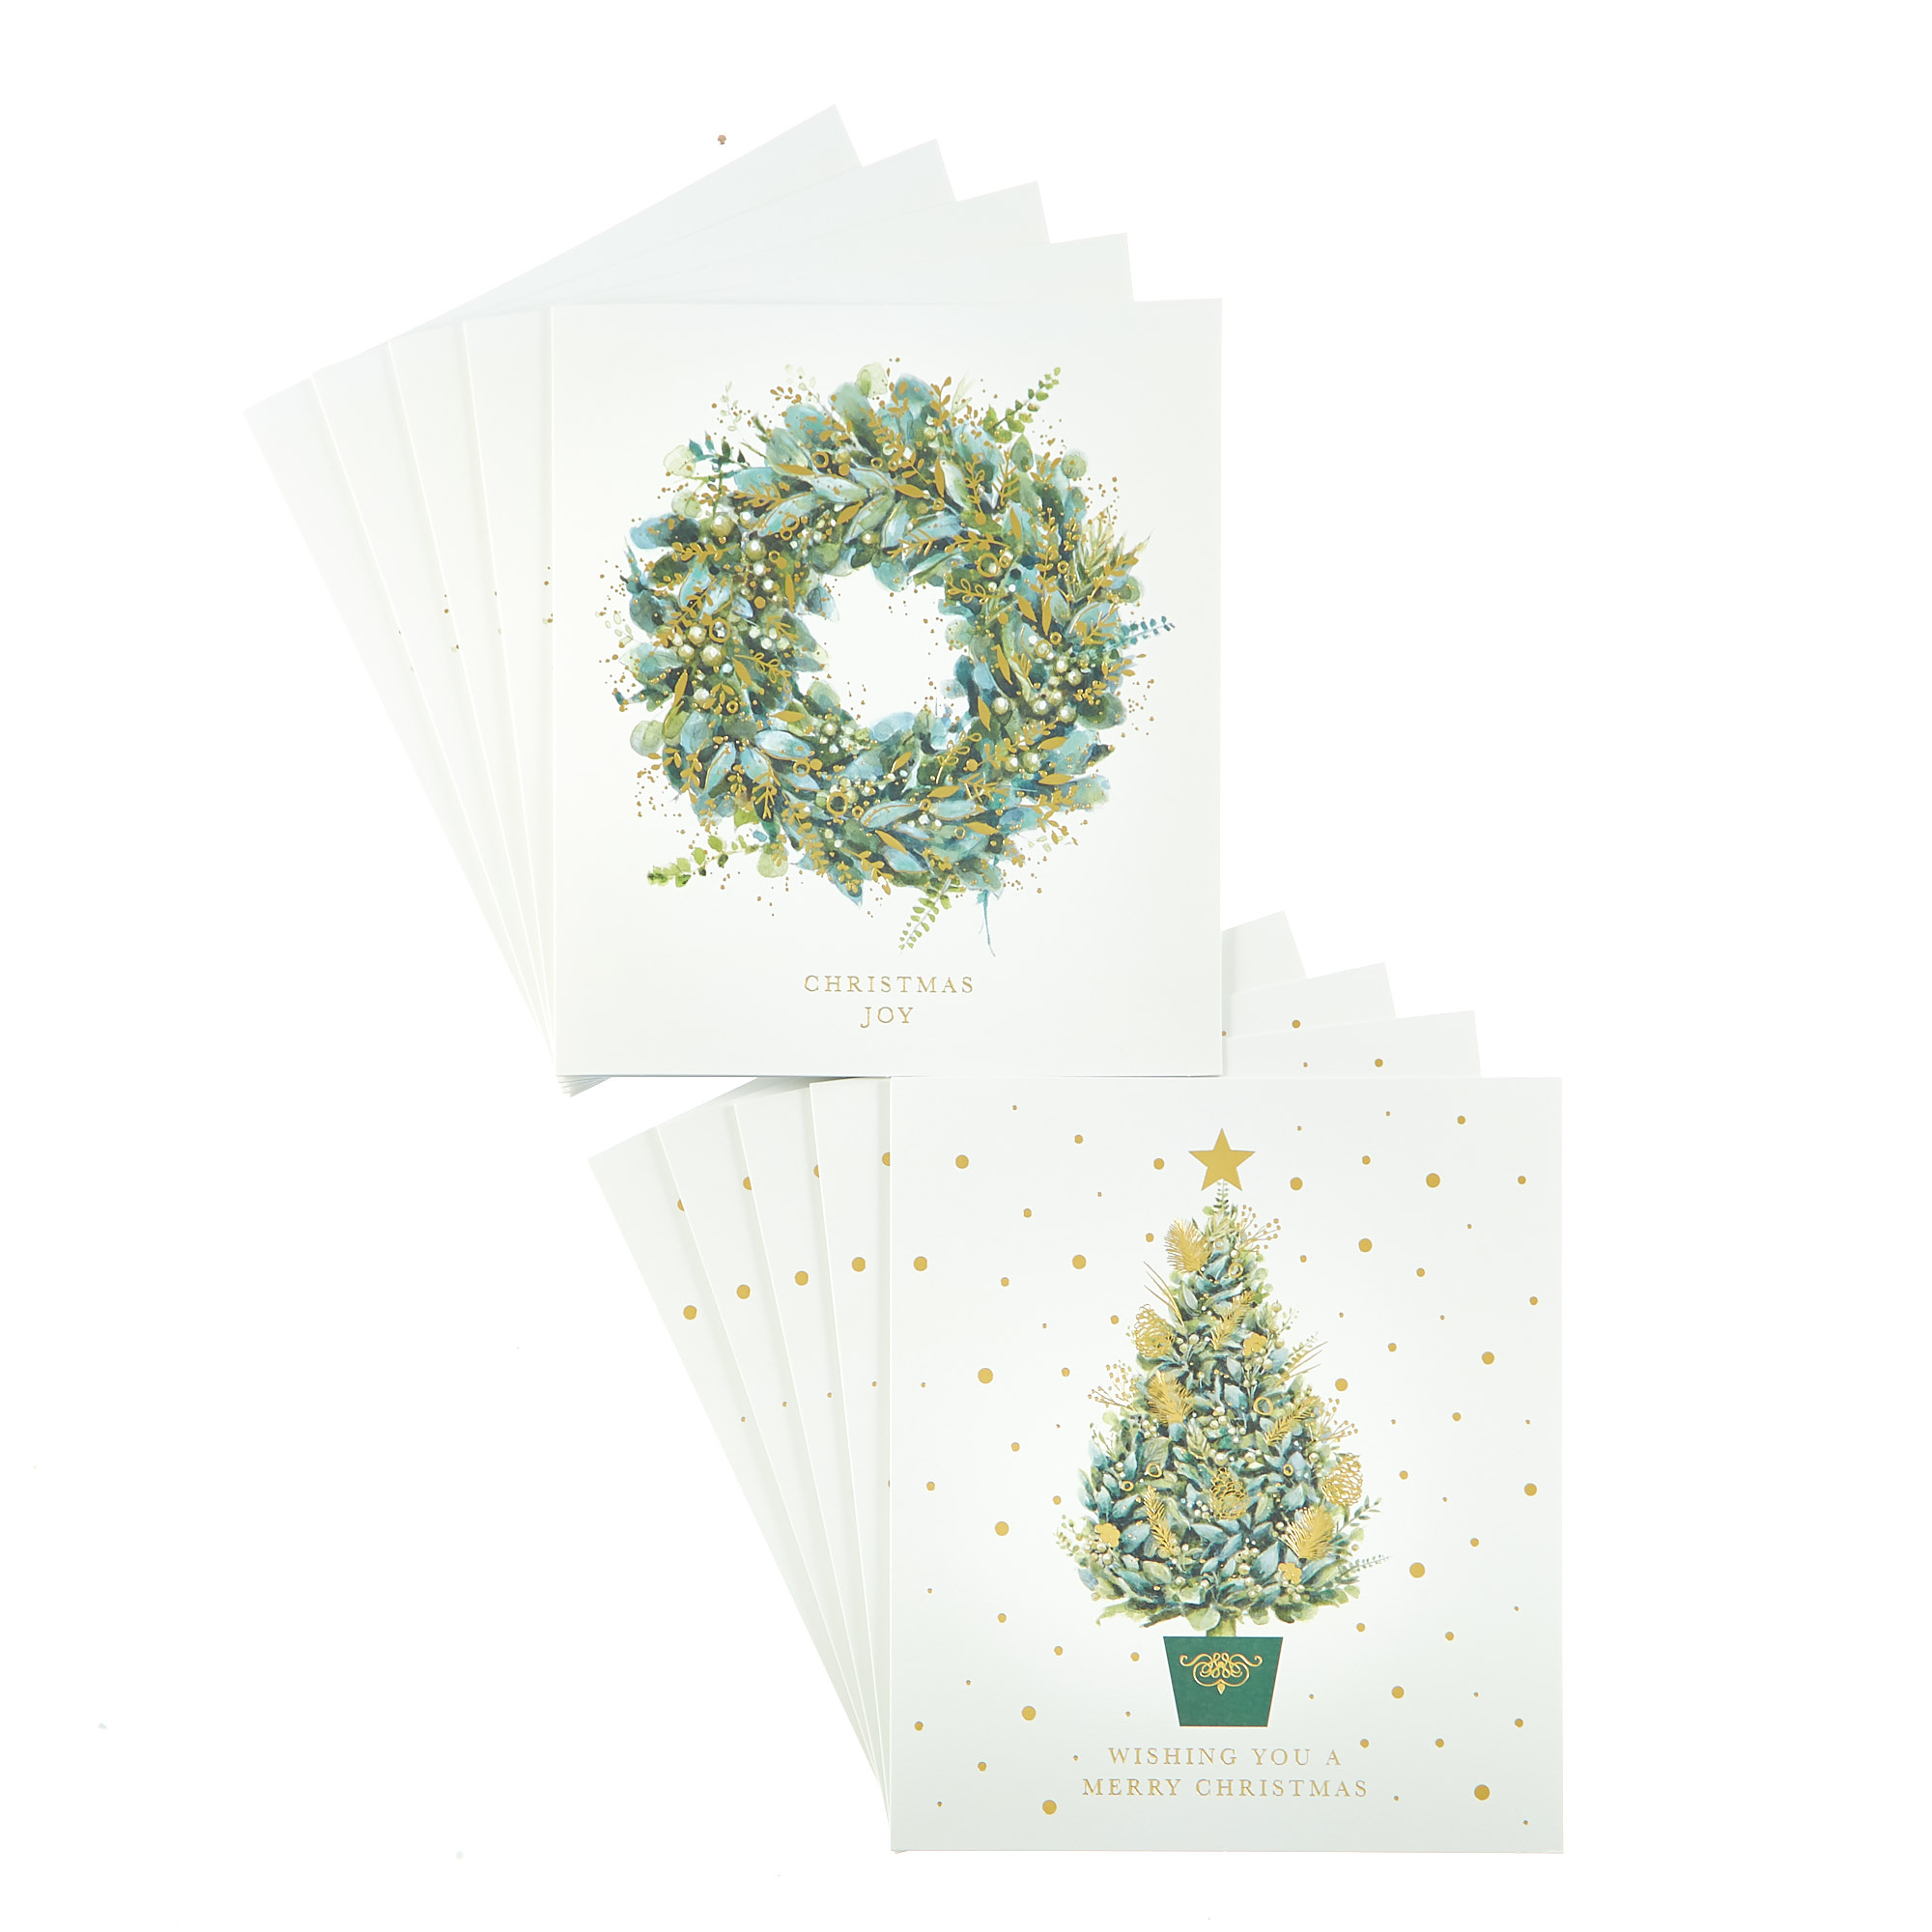 12 Deluxe Charity Boxed Christmas Cards - Tree & Wreath (2 Designs)